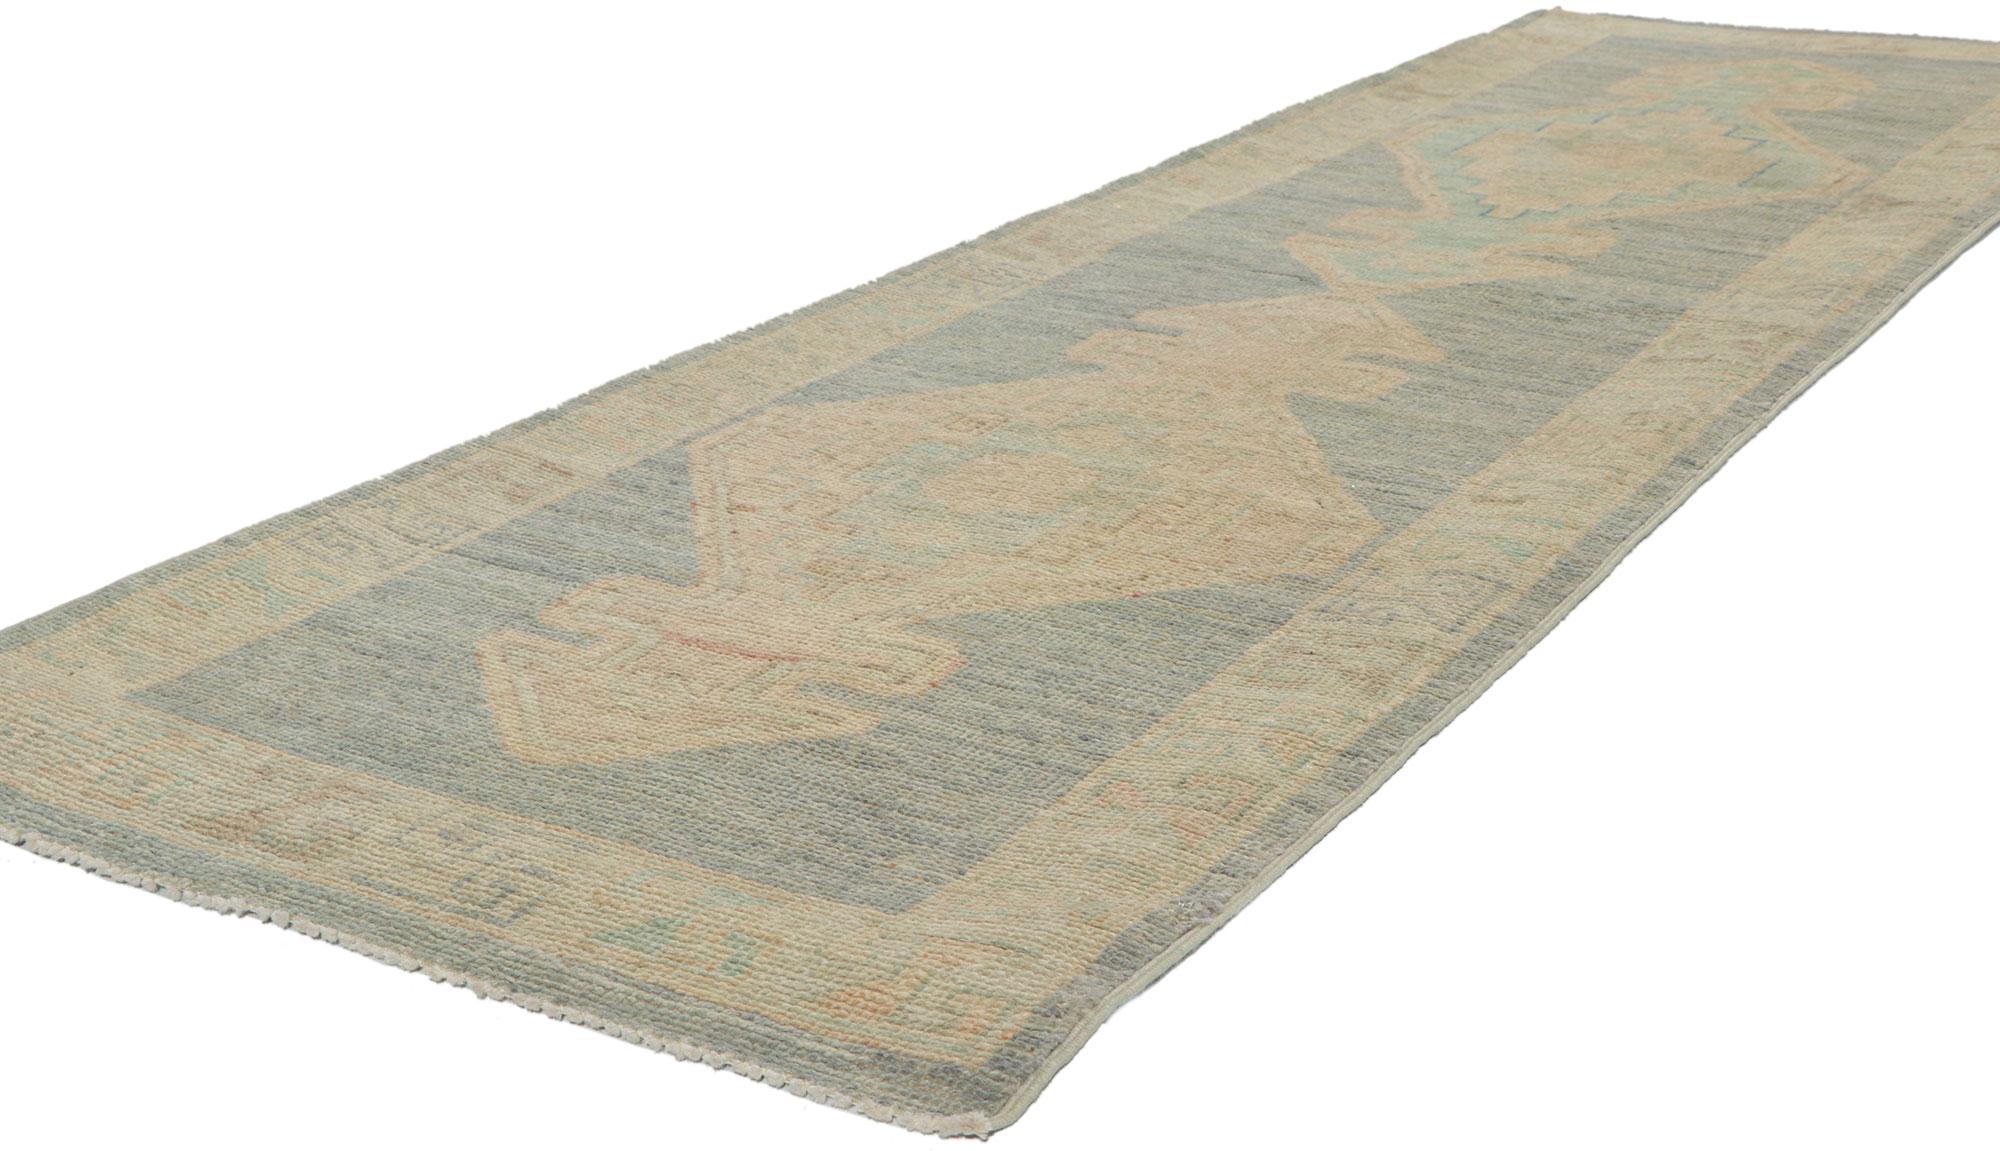 80829 Contemporary Oushak Runner, 02'05 x 08'04. Polished and playful, this hand-knotted wool contemporary Contemporary Oushak runner beautifully embodies a modern style. With elements of comfort, modern style and functional versatility, this Oushak